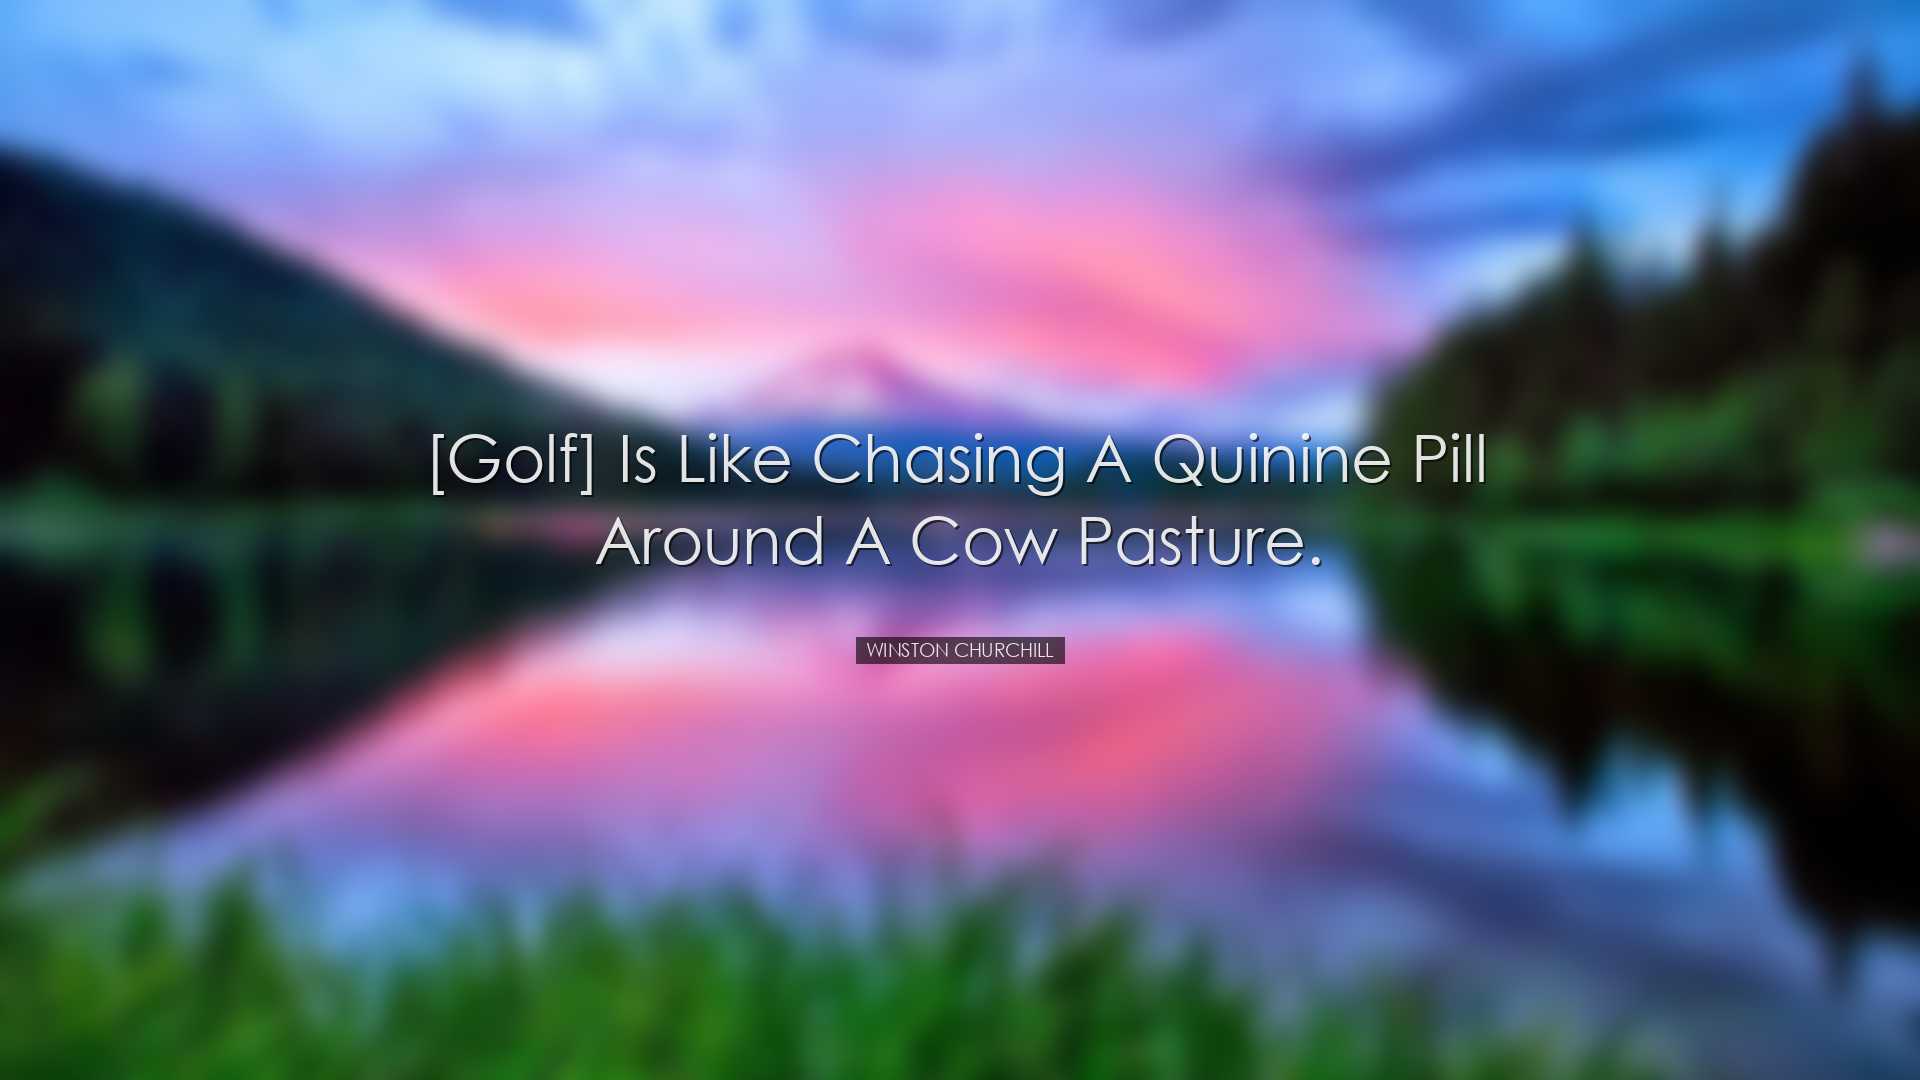 [Golf] is like chasing a quinine pill around a cow pasture. - Wins